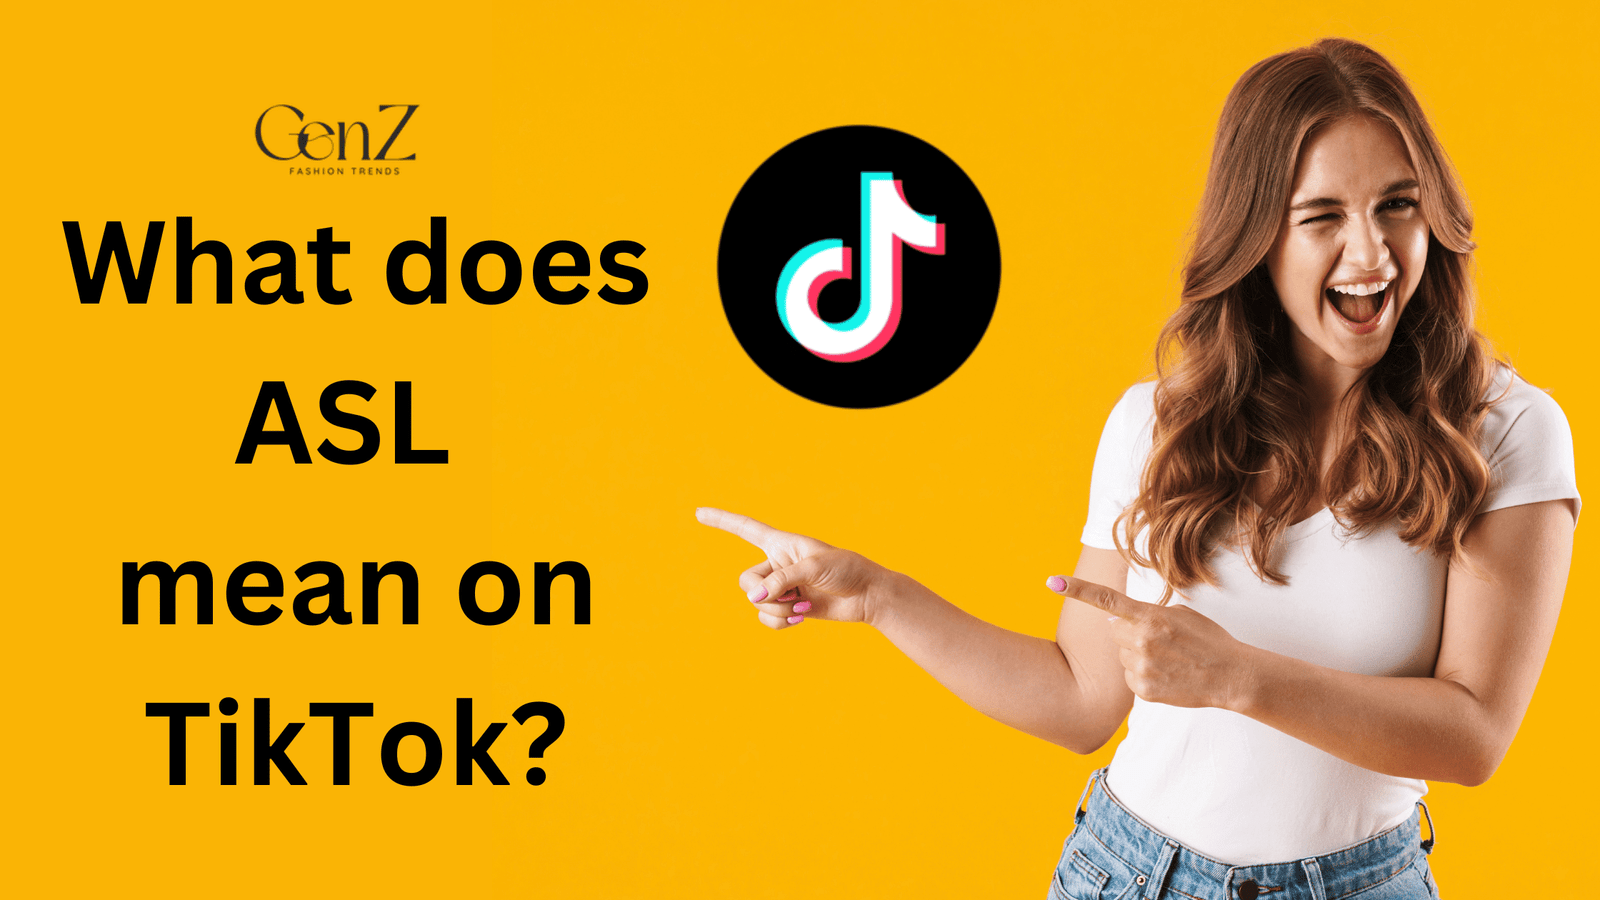 What does ASL mean on TikTok